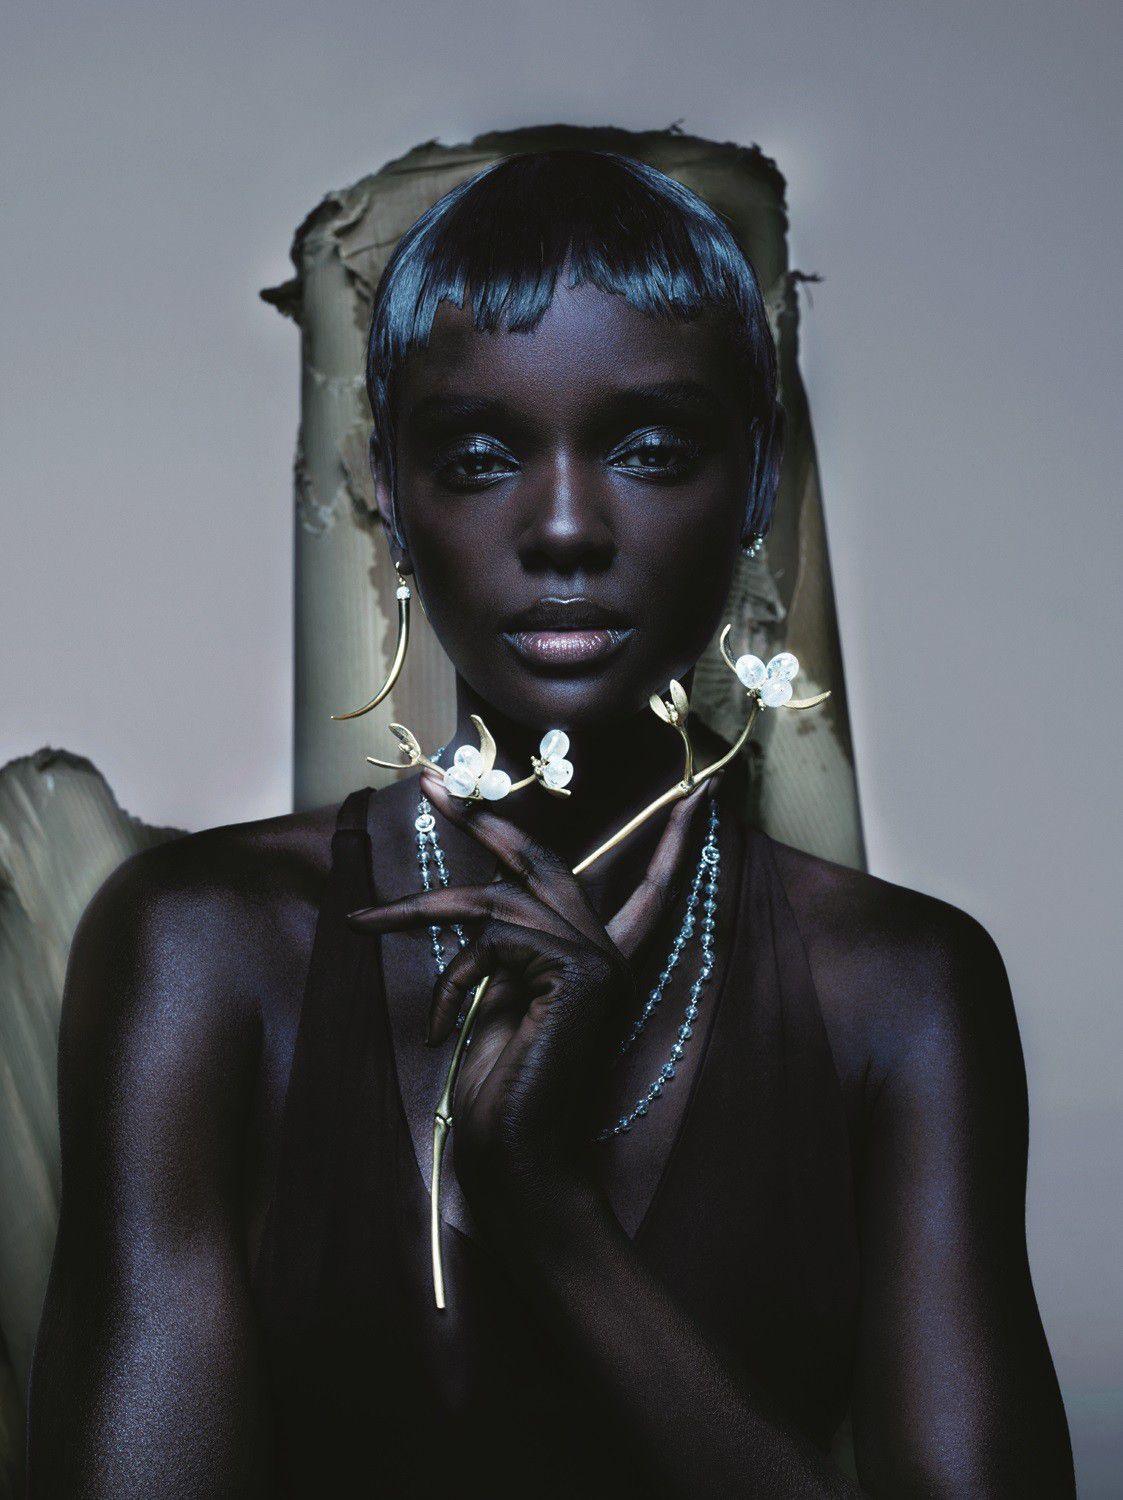 Duckie Thot by Byzantium for Vogue UK, Photo by Nick Knight, April 2019